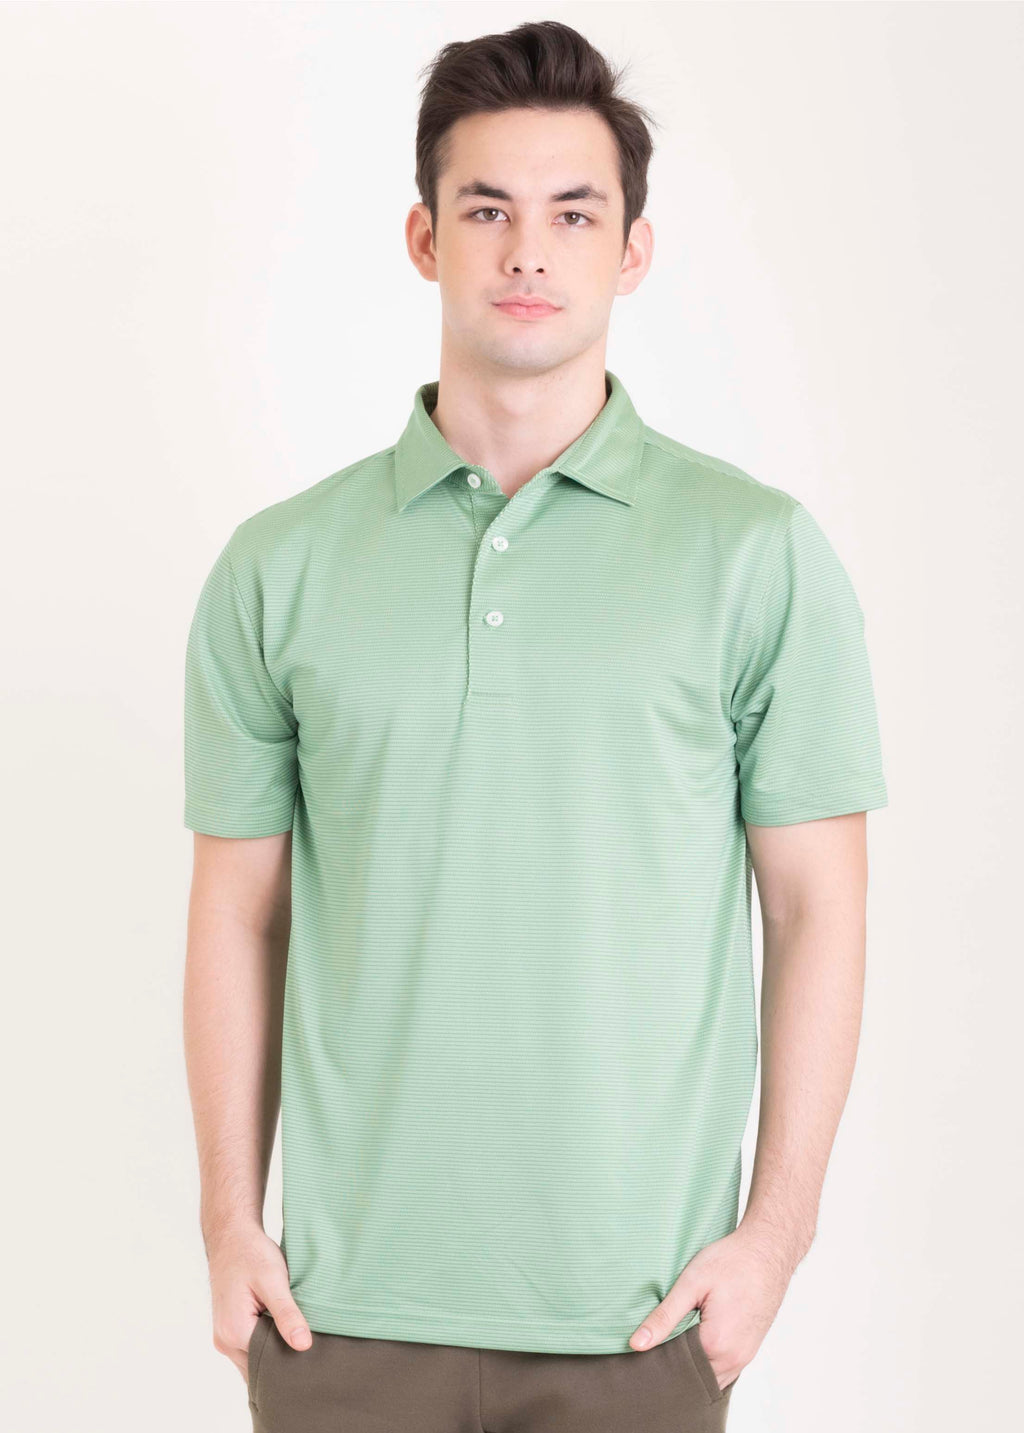 Ramé Dryfit Polo Shirt in Textured Green